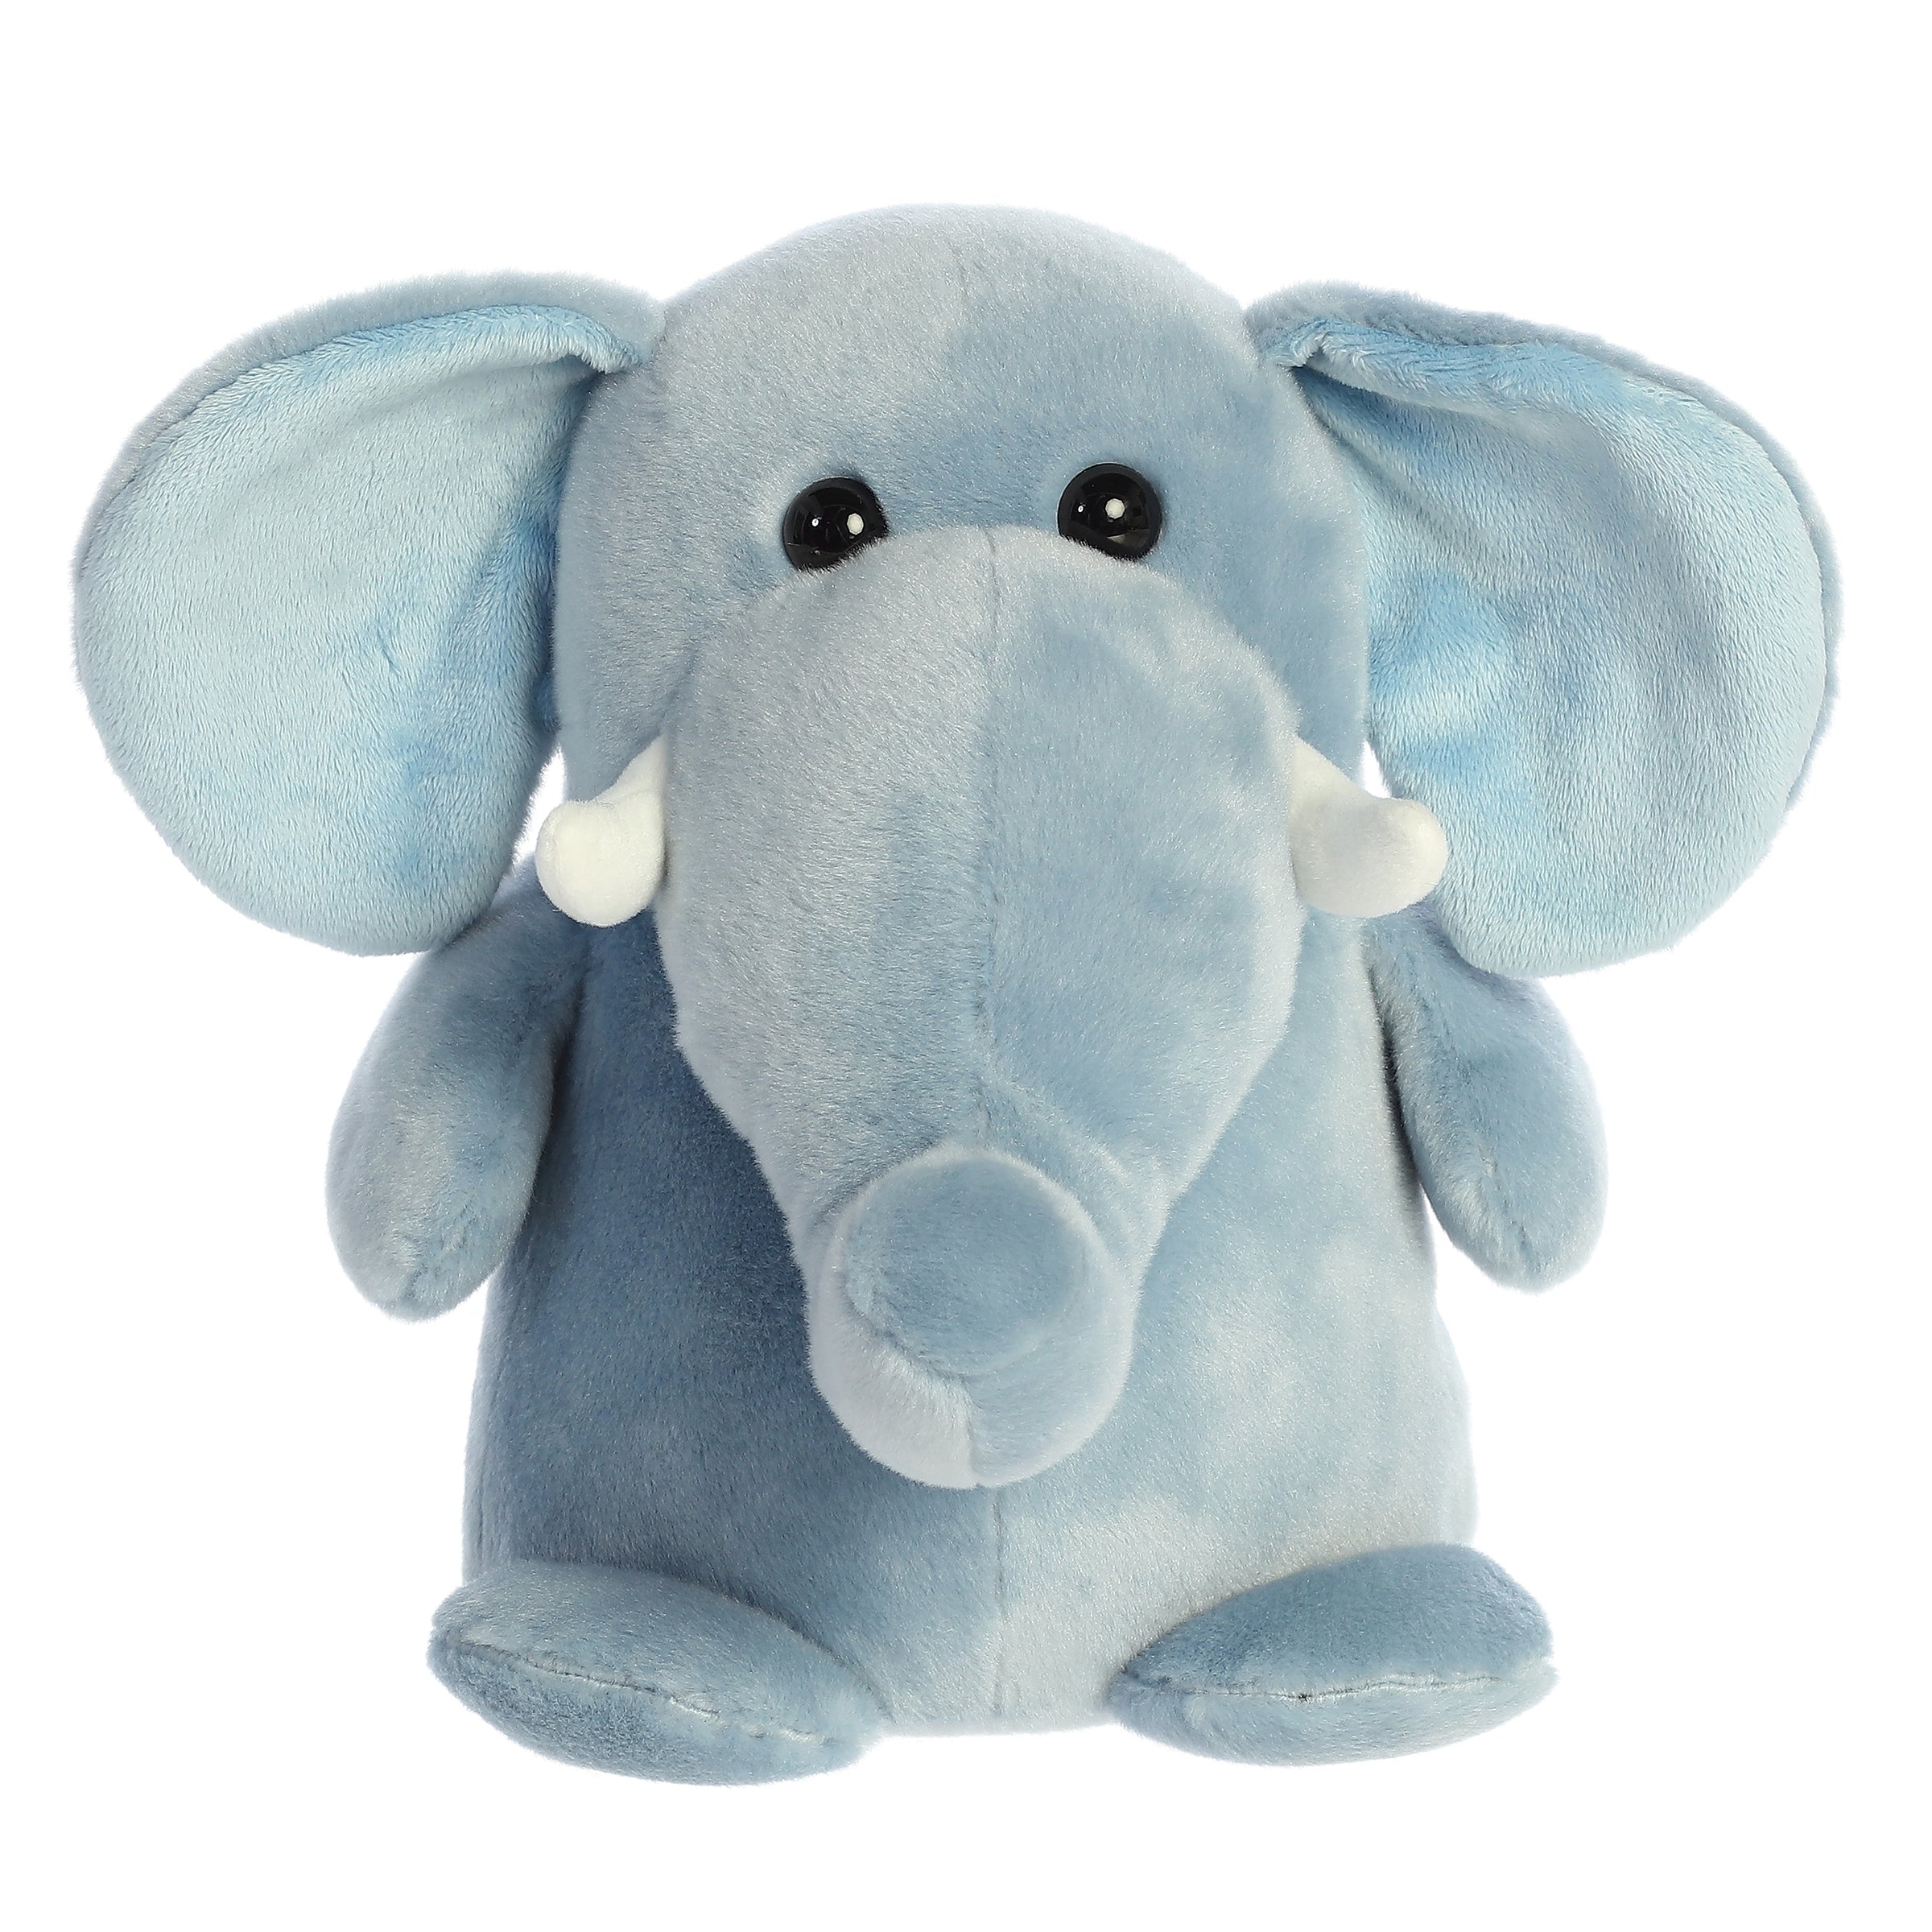 Elephant plush in baby blue, showcasing a majestic trunk, floppy ears, and ivory tusks, part of the Happy Hippo And Friends.